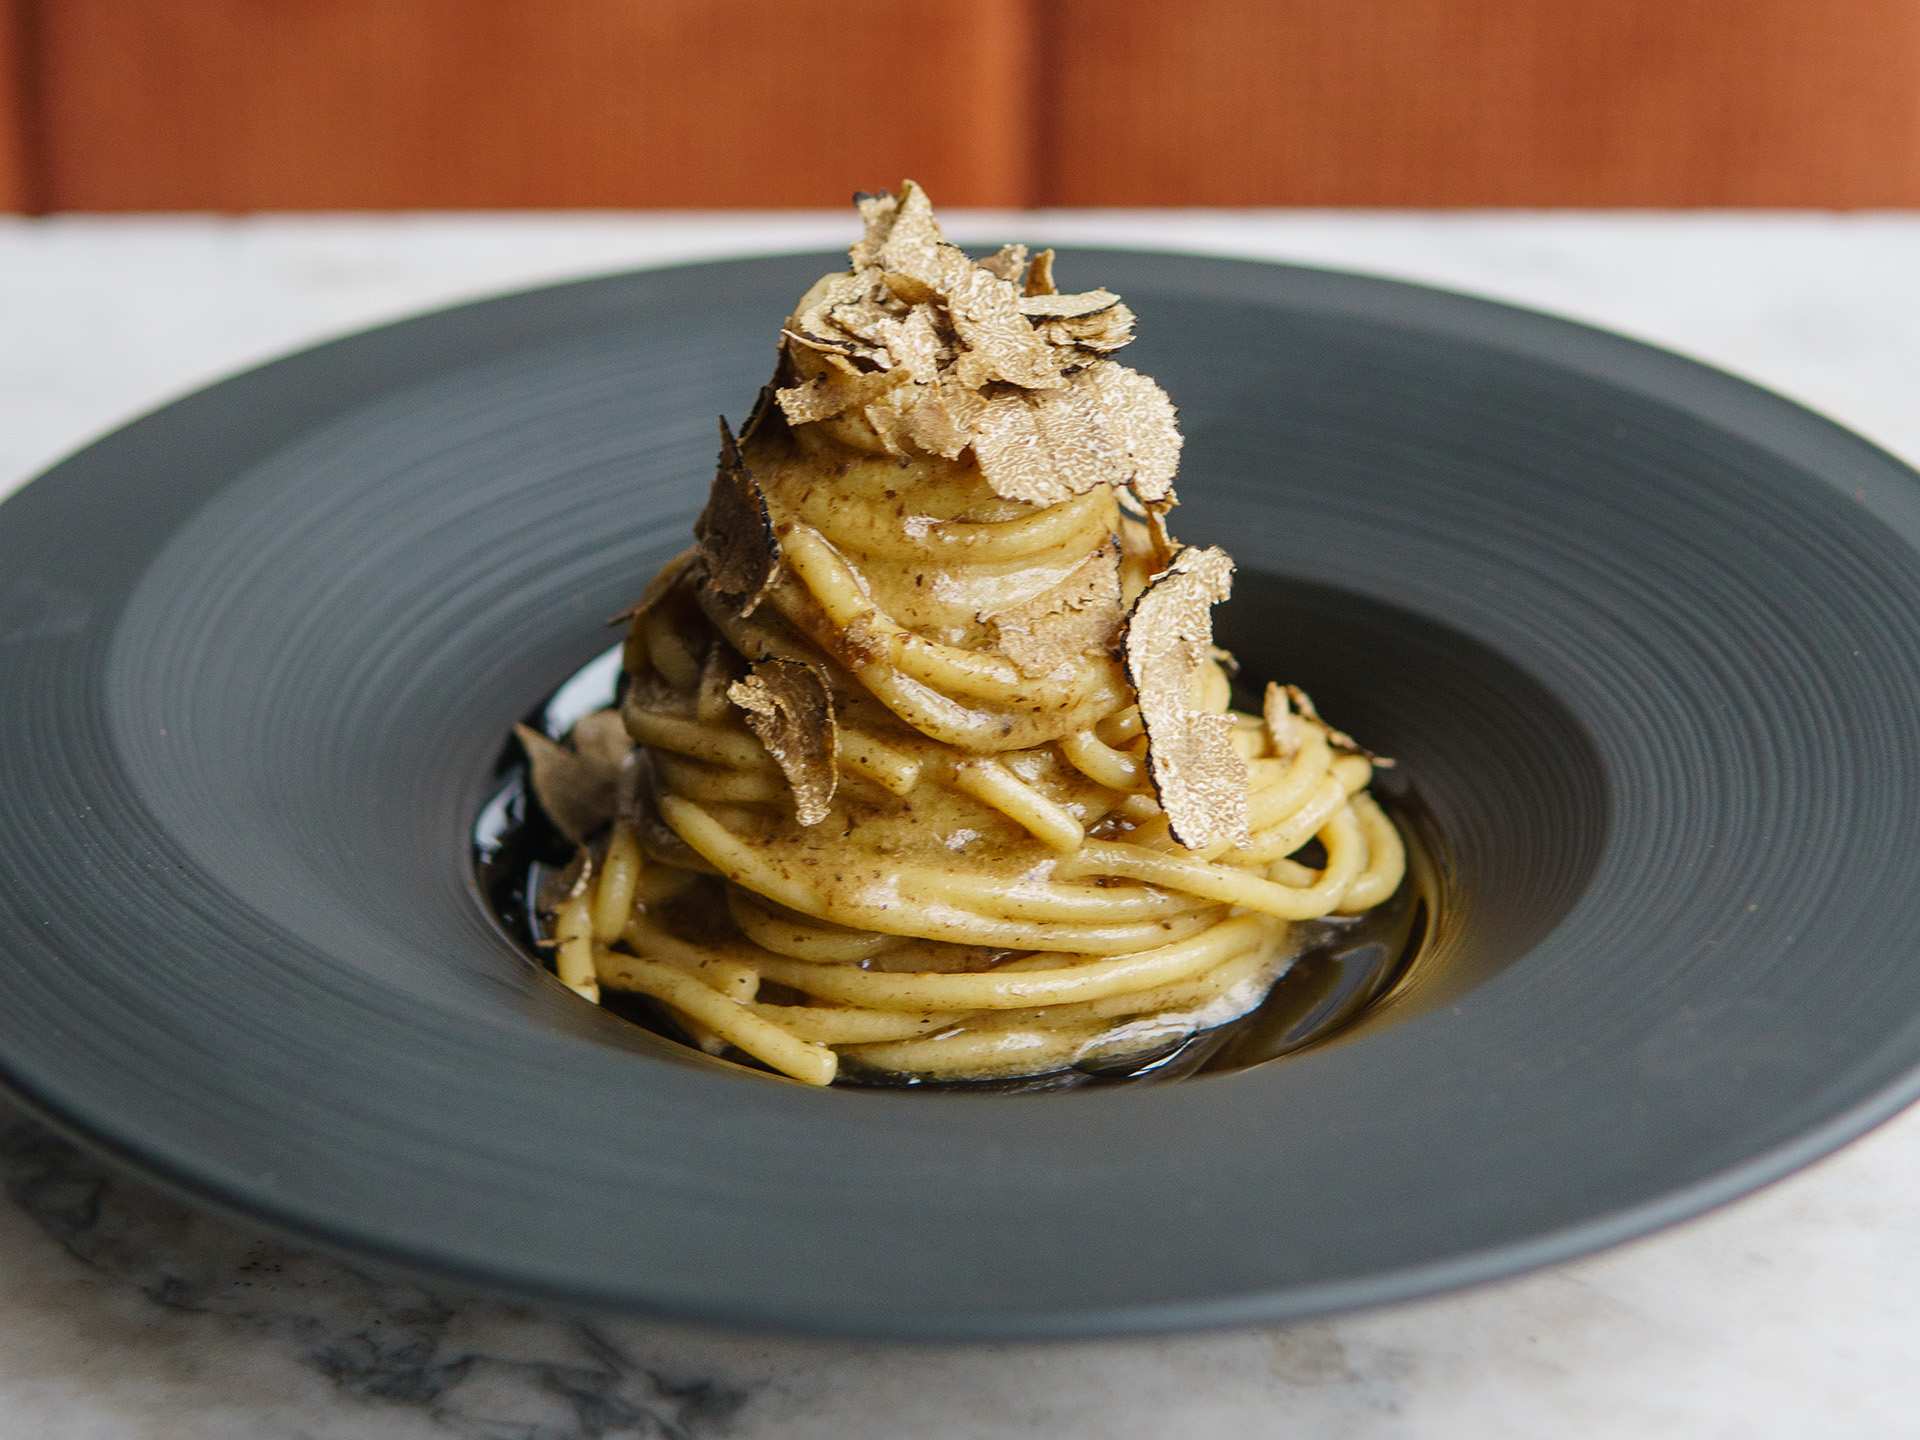 Vegan restaurants | A stack of pasta with truffle from Gia